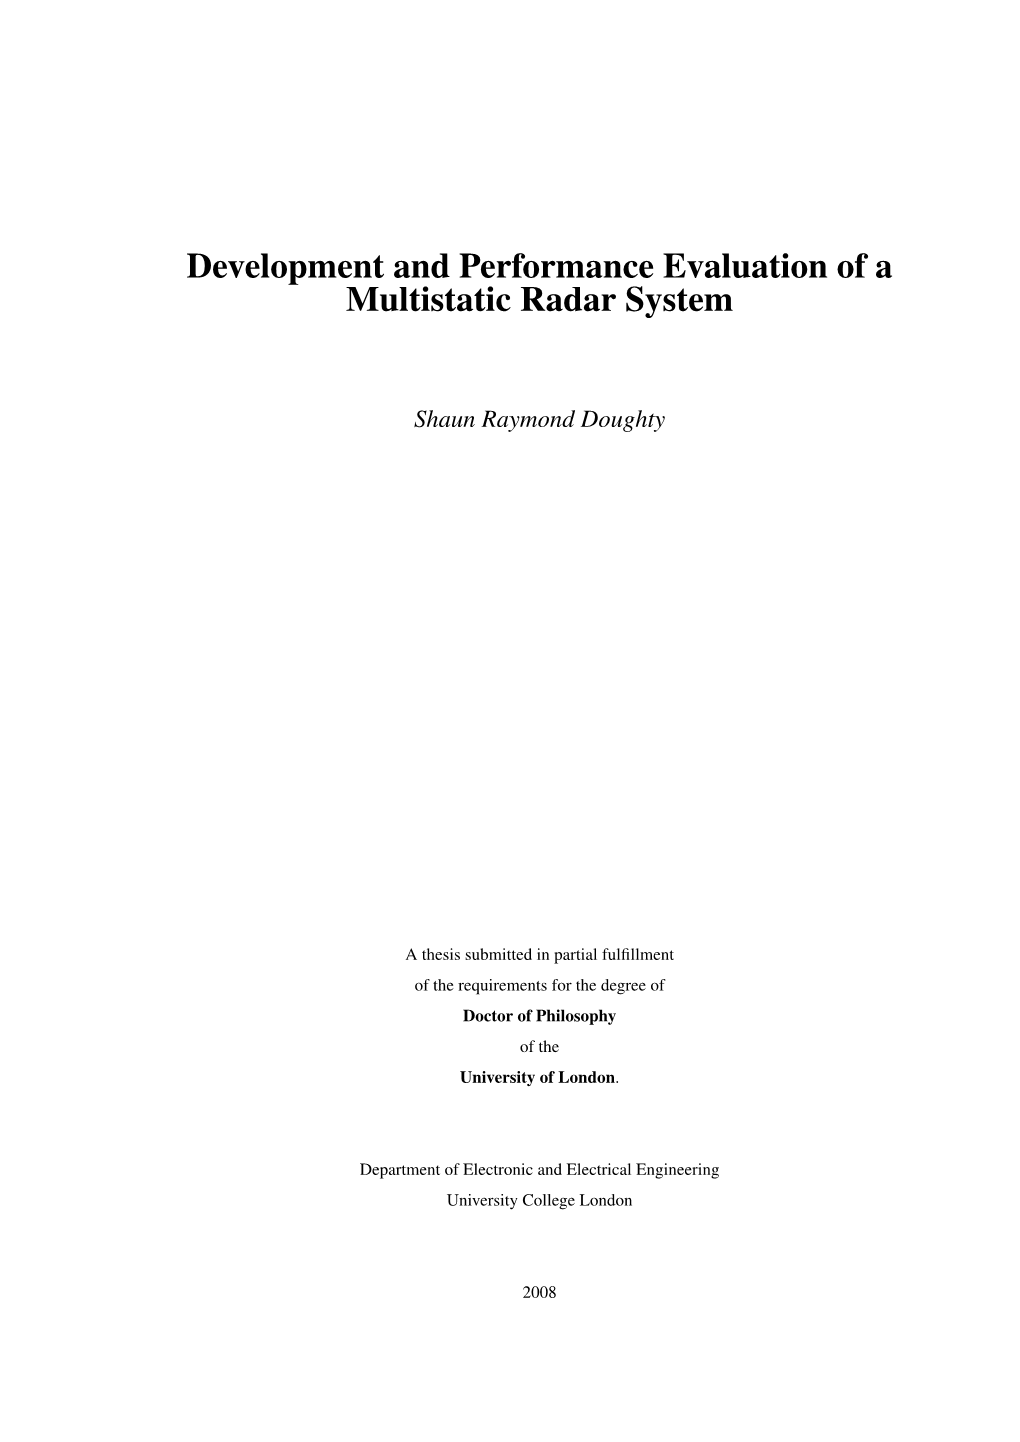 Development and Performance Evaluation of a Multistatic Radar System